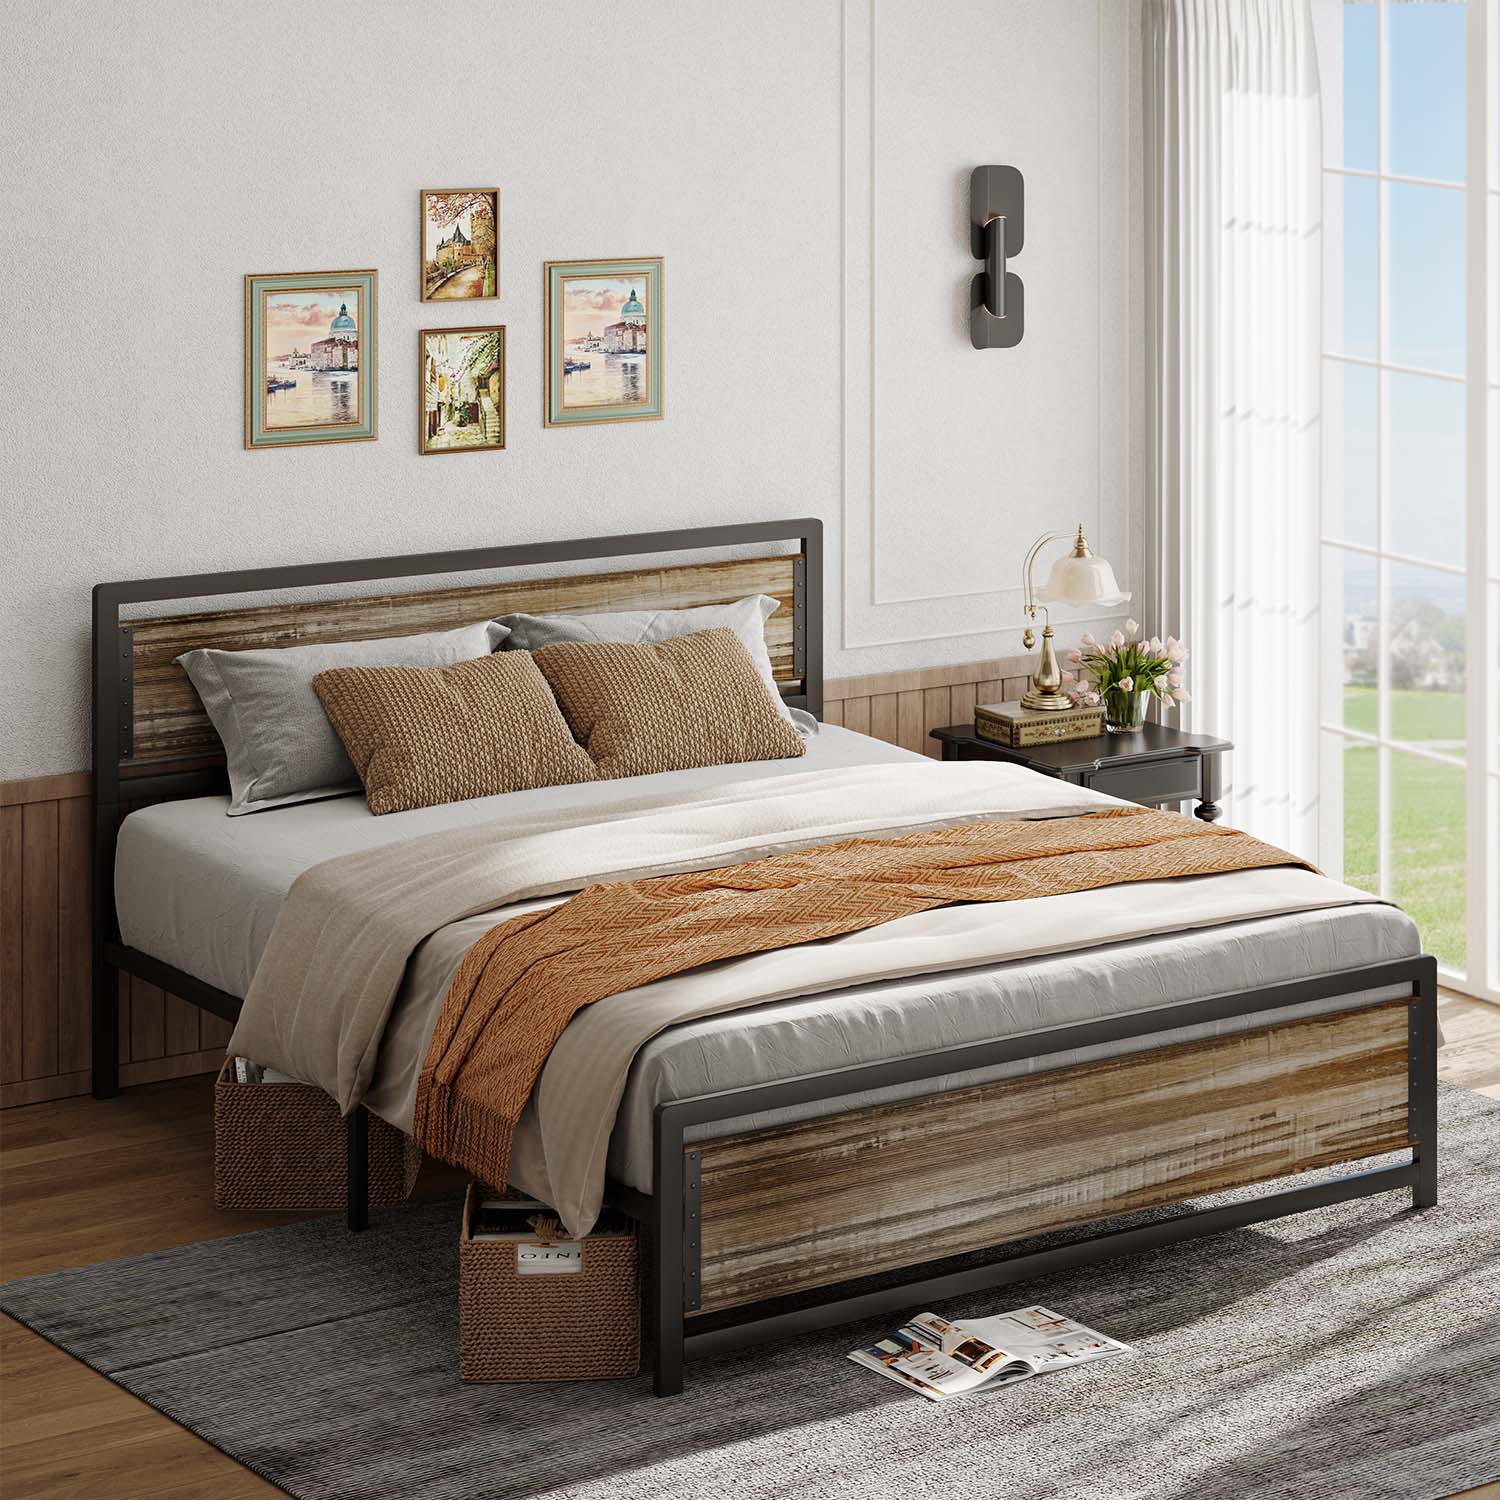 Gizoon BF32 Metal Platform Bed Frame with Wooden Headboard & Large Underbed Storage